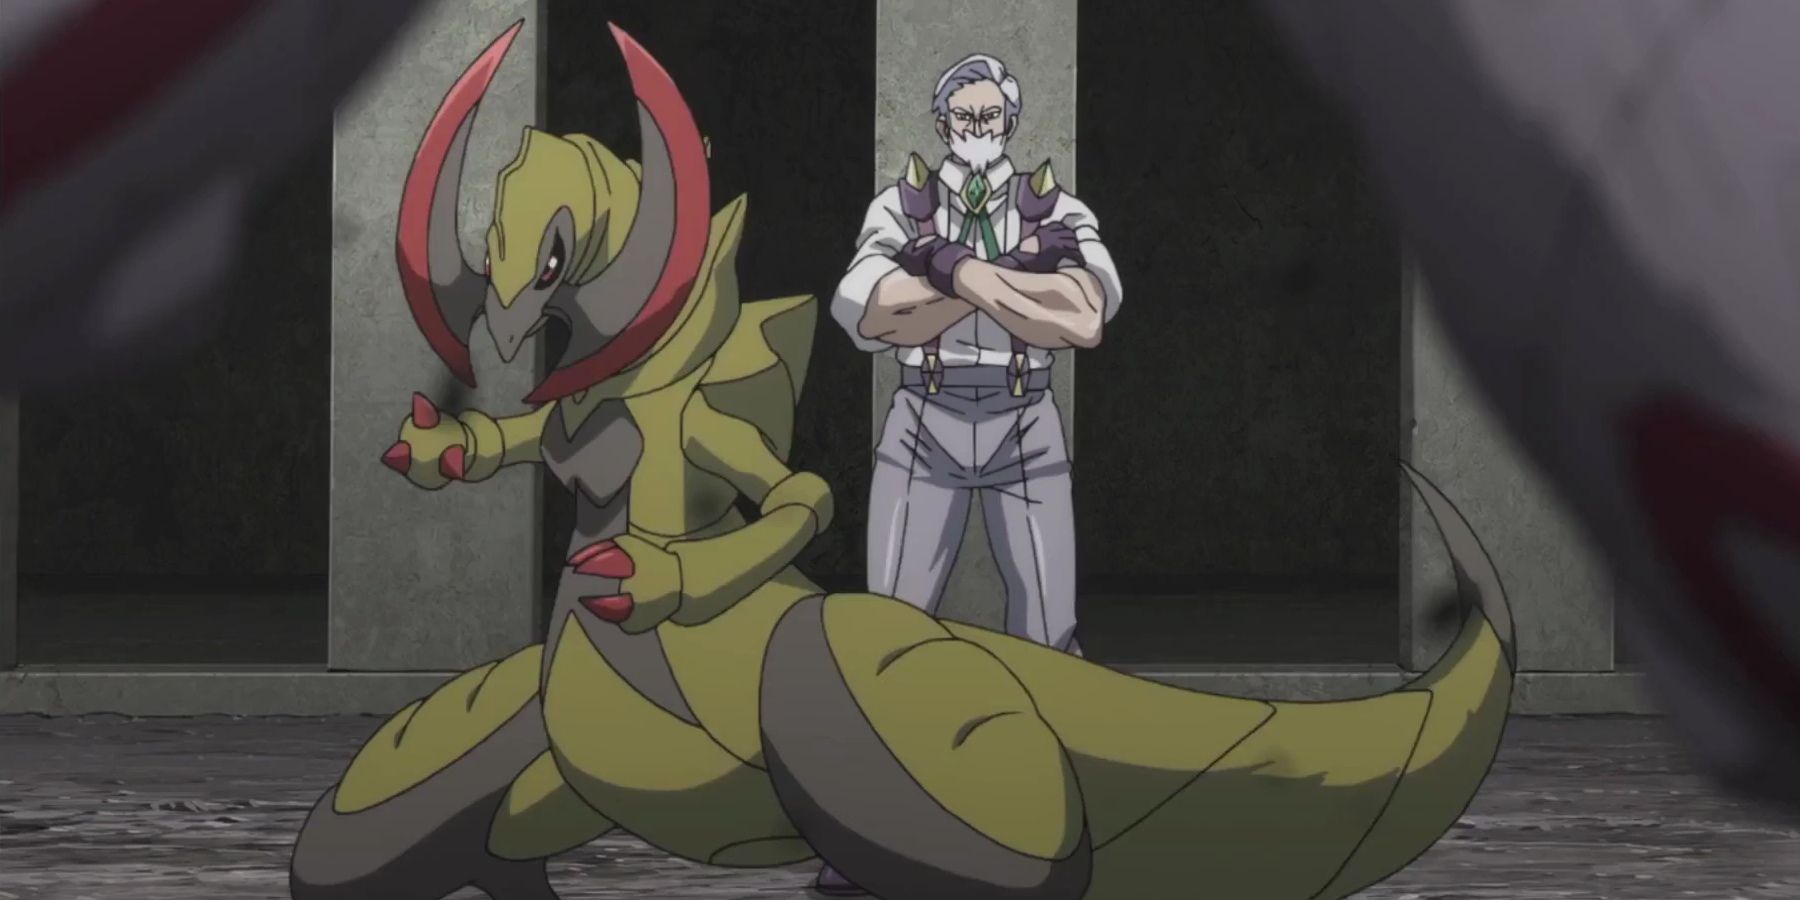 A Haxorus and Drayden from the Pokemon Generations anime.